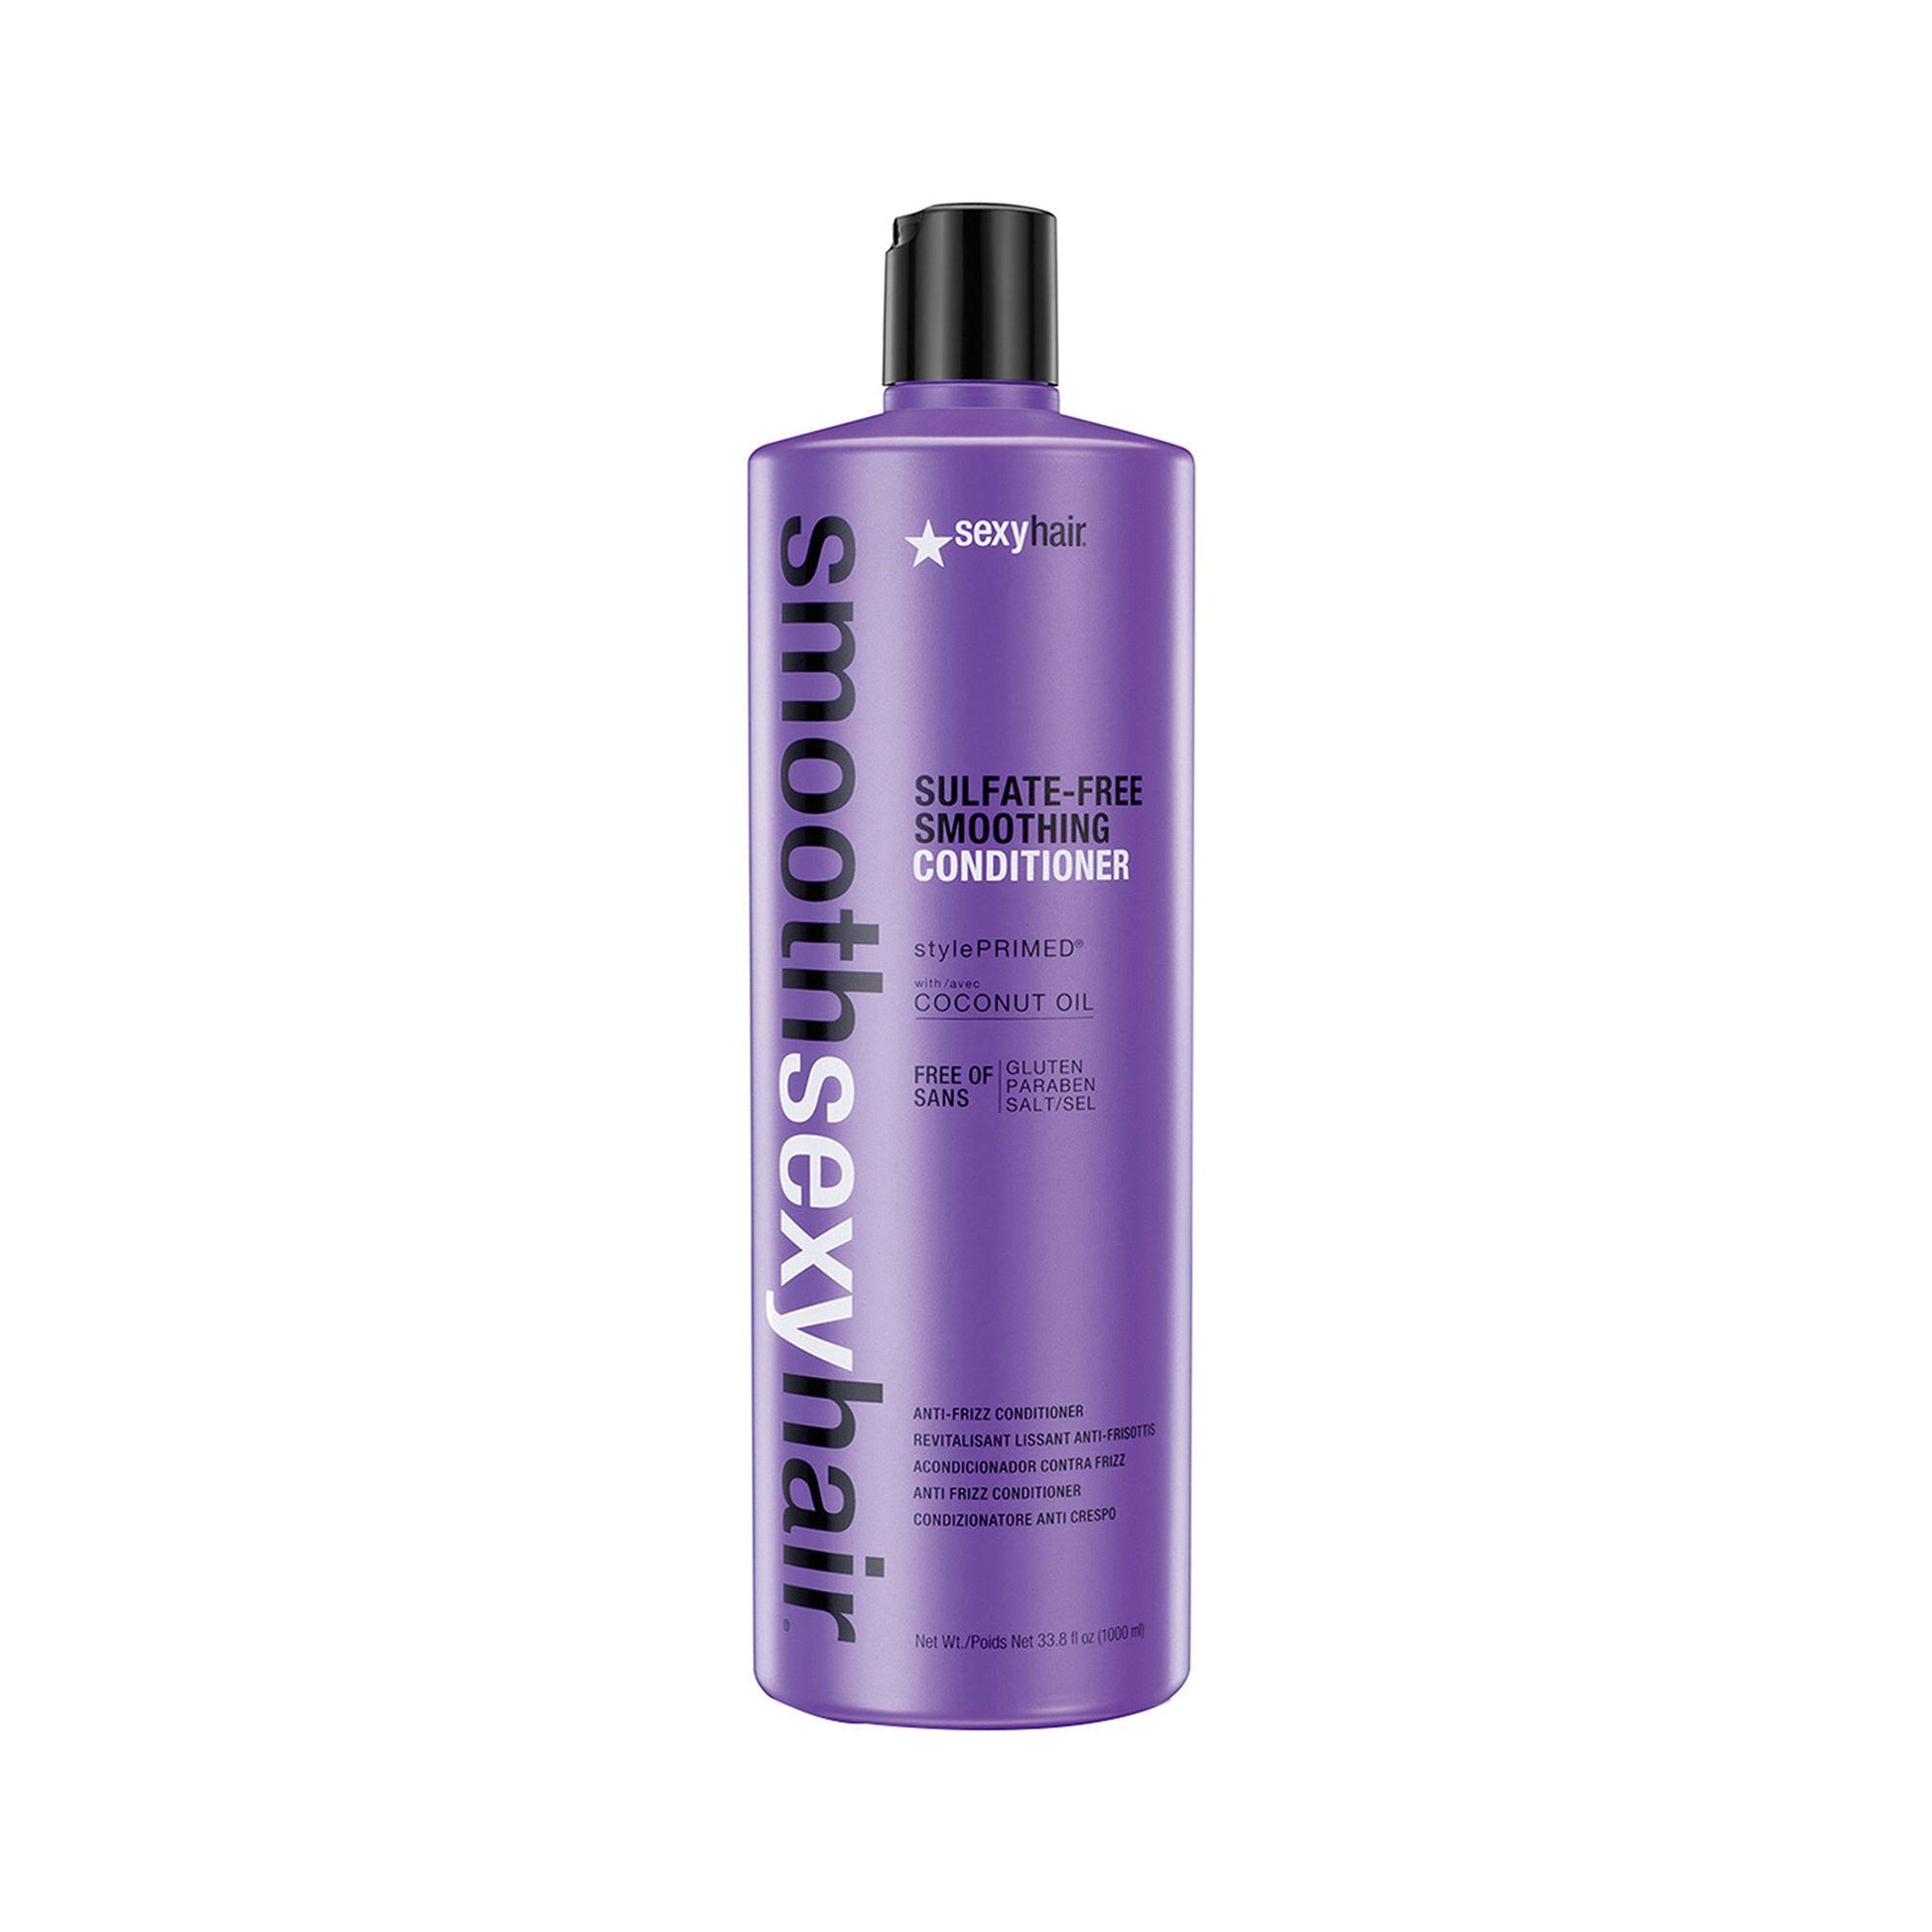 Sexy Hair Smooth Sexy Hair Smoothing ConditionerSEXY HAIRSize: 33.8 oz